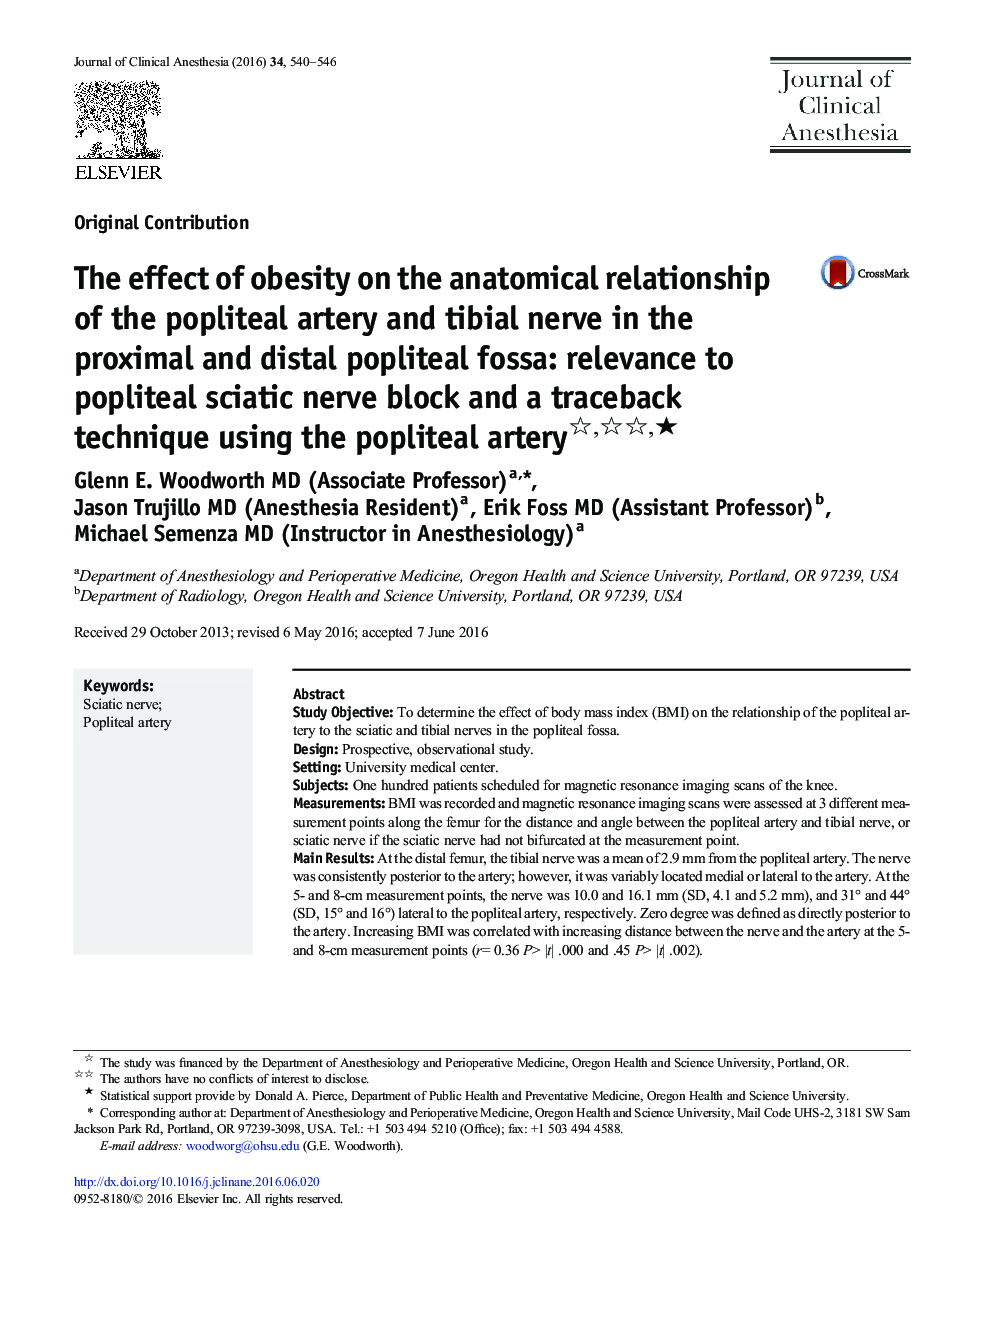 Original ContributionThe effect of obesity on the anatomical relationship of the popliteal artery and tibial nerve in the proximal and distal popliteal fossa: relevance to popliteal sciatic nerve block and a traceback technique using the popliteal arteryâ